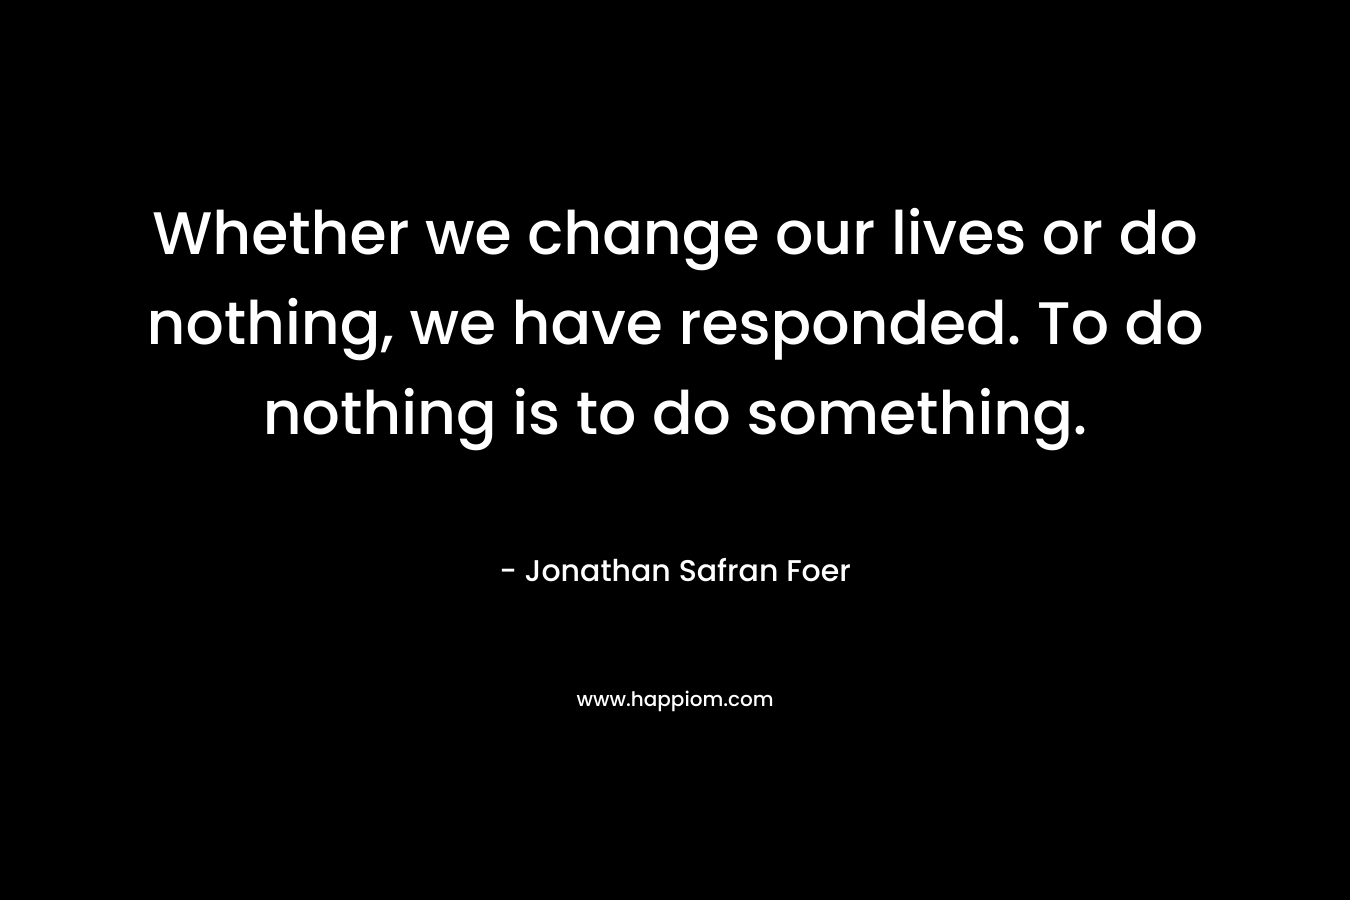 Whether we change our lives or do nothing, we have responded. To do nothing is to do something. – Jonathan Safran Foer